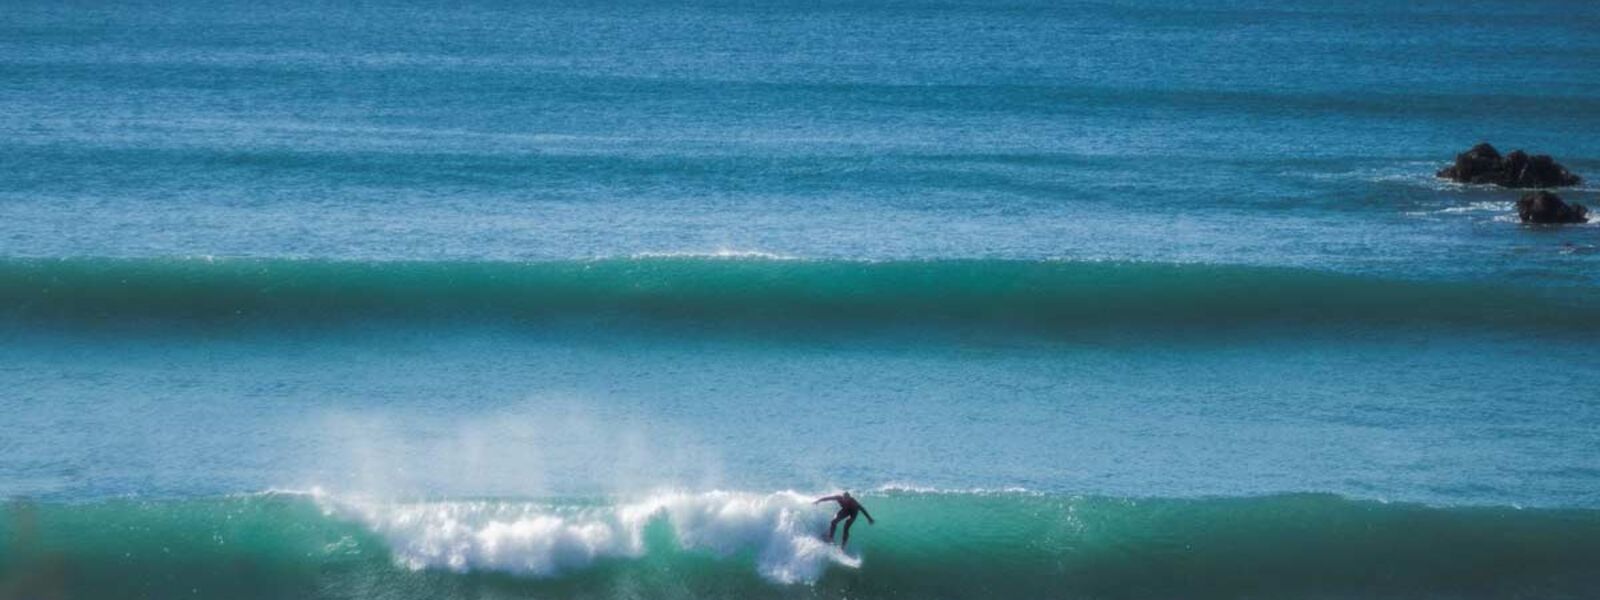 Surfing in Conil at one of the best surf spots in Spain